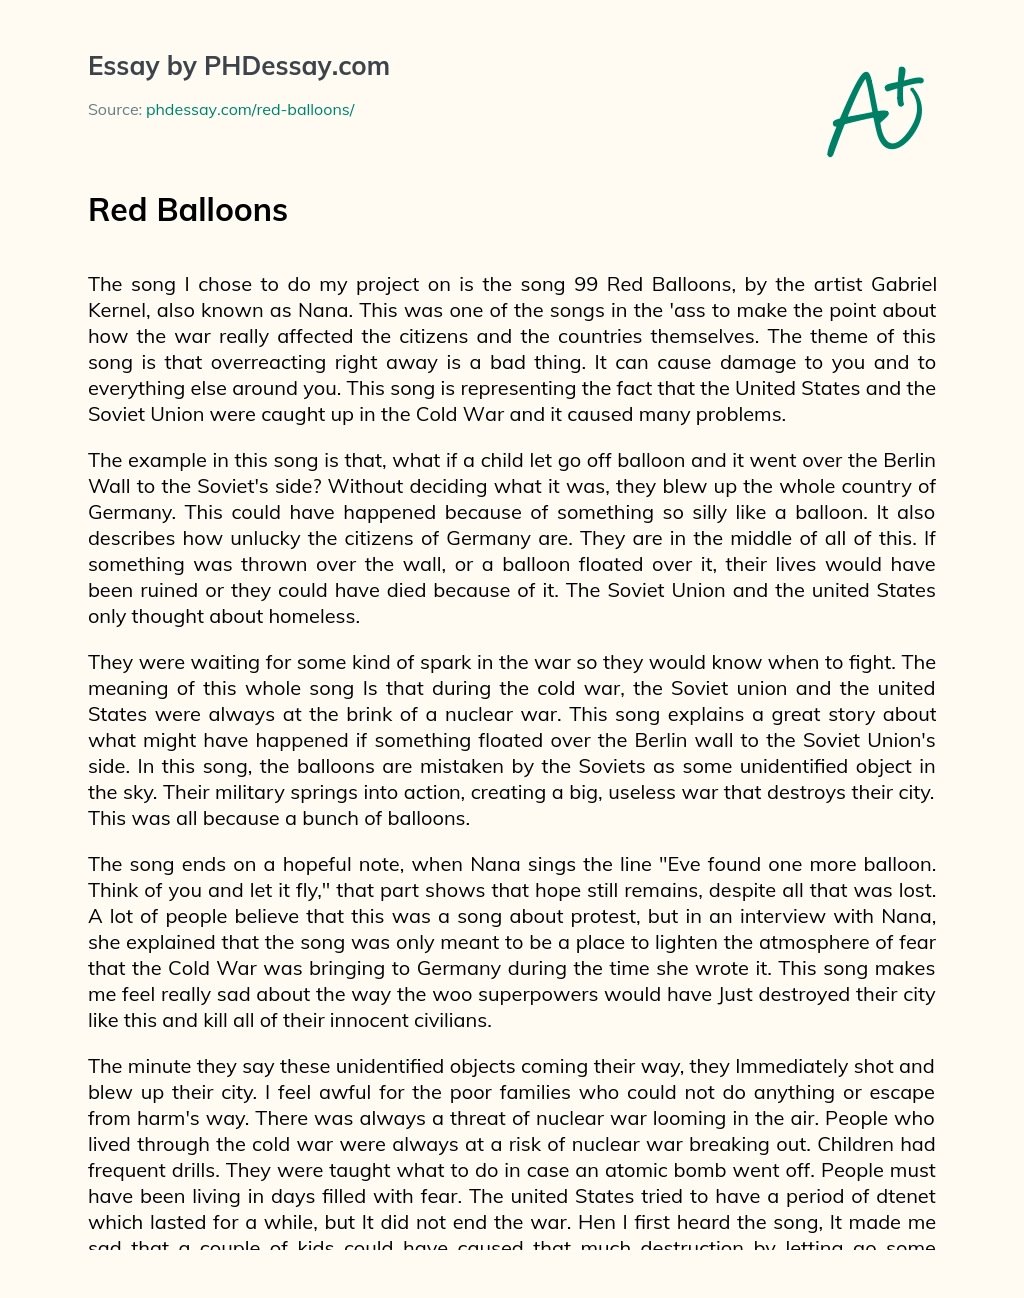 Red Balloons essay